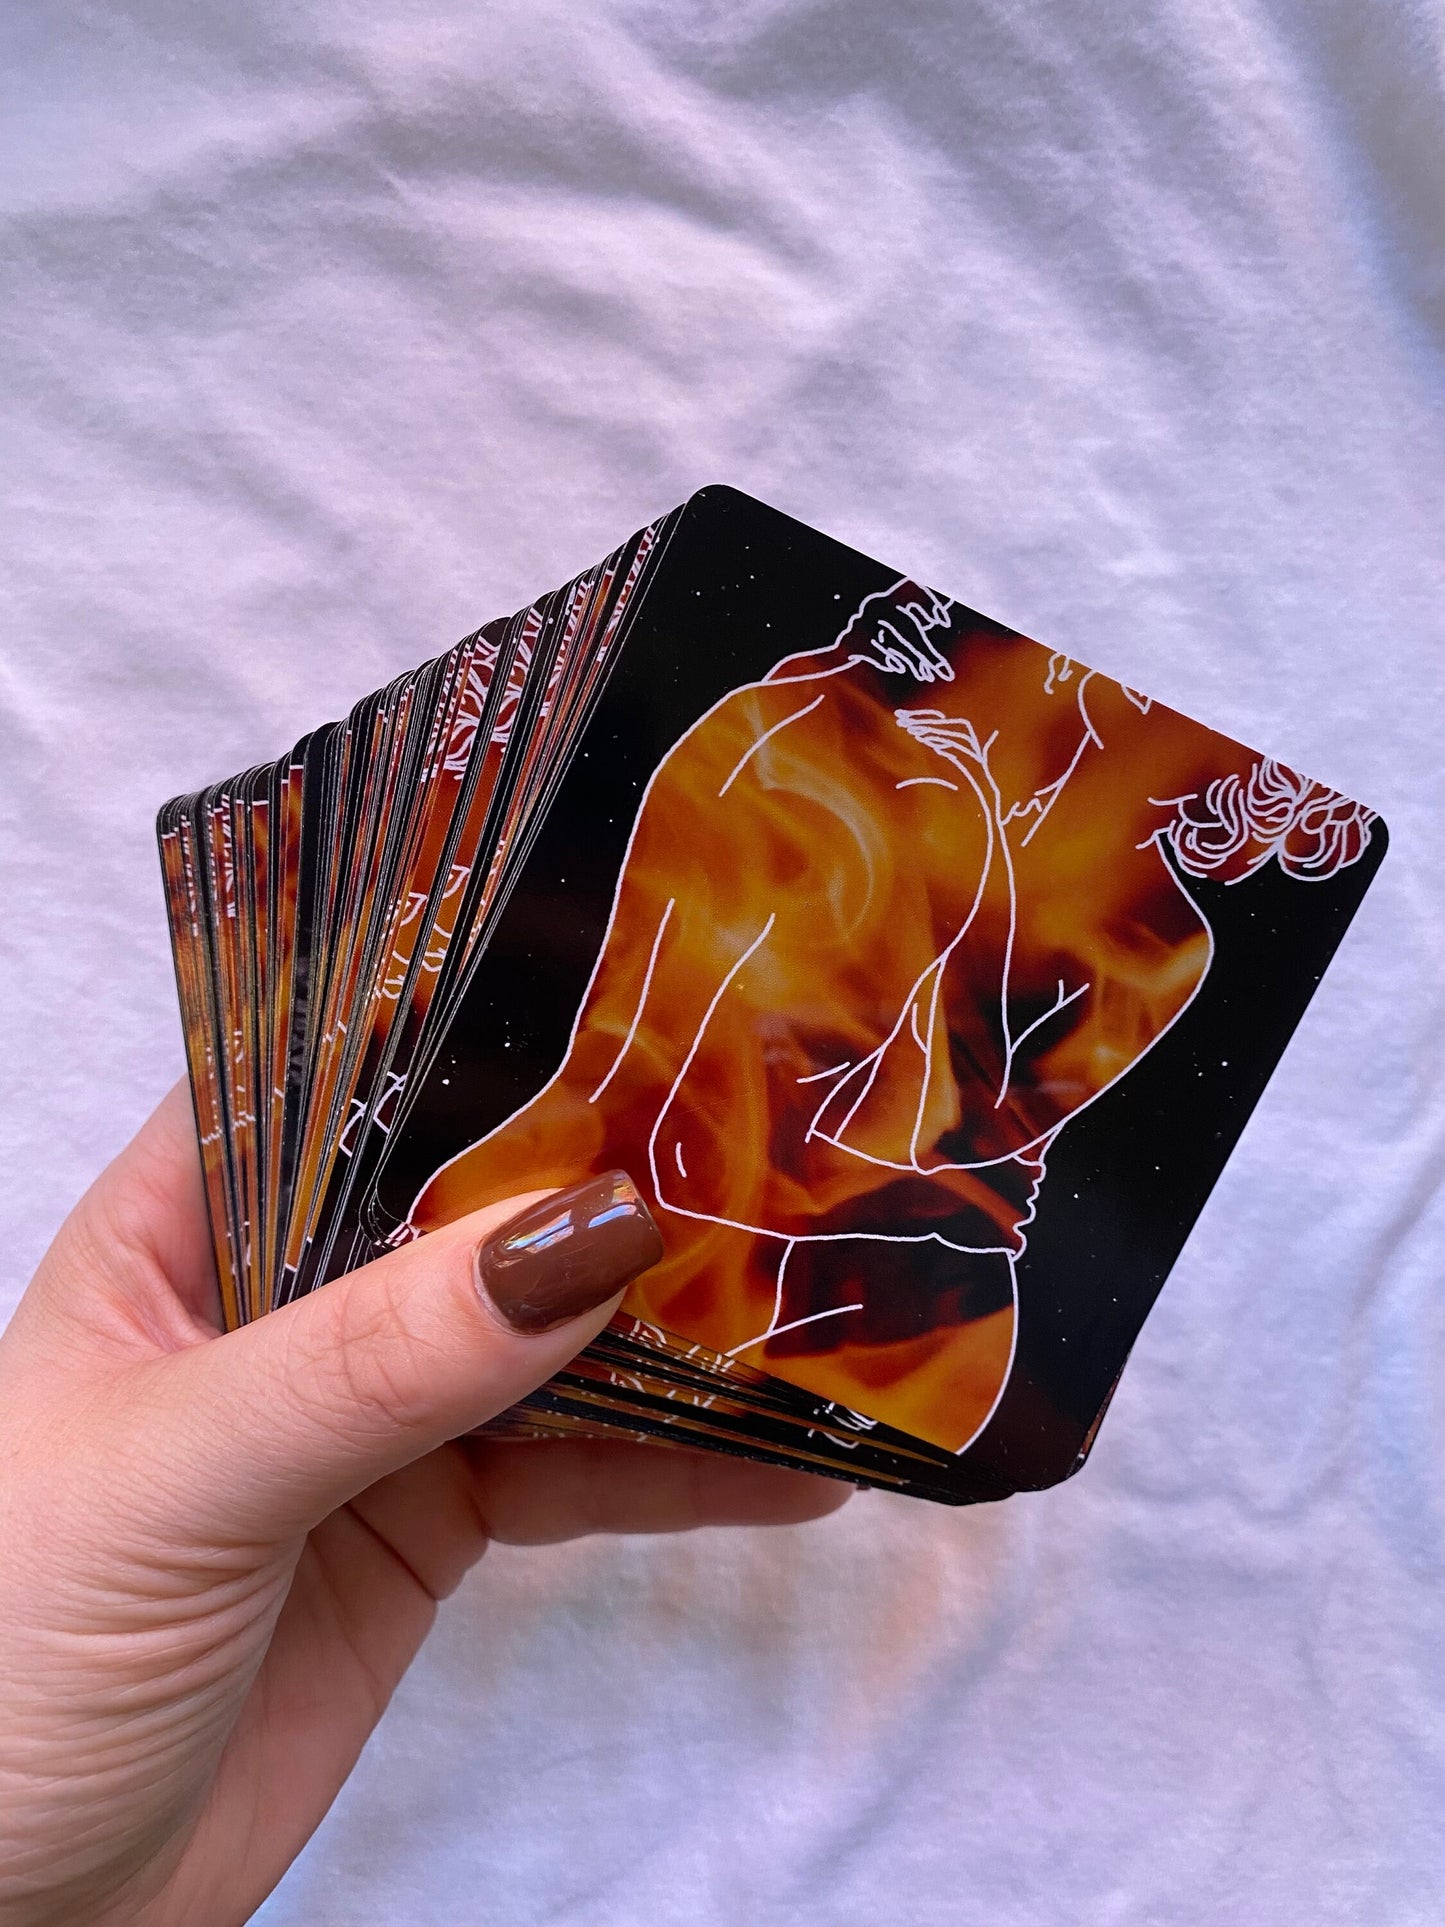 Get a tarot or oracle deck created by me!